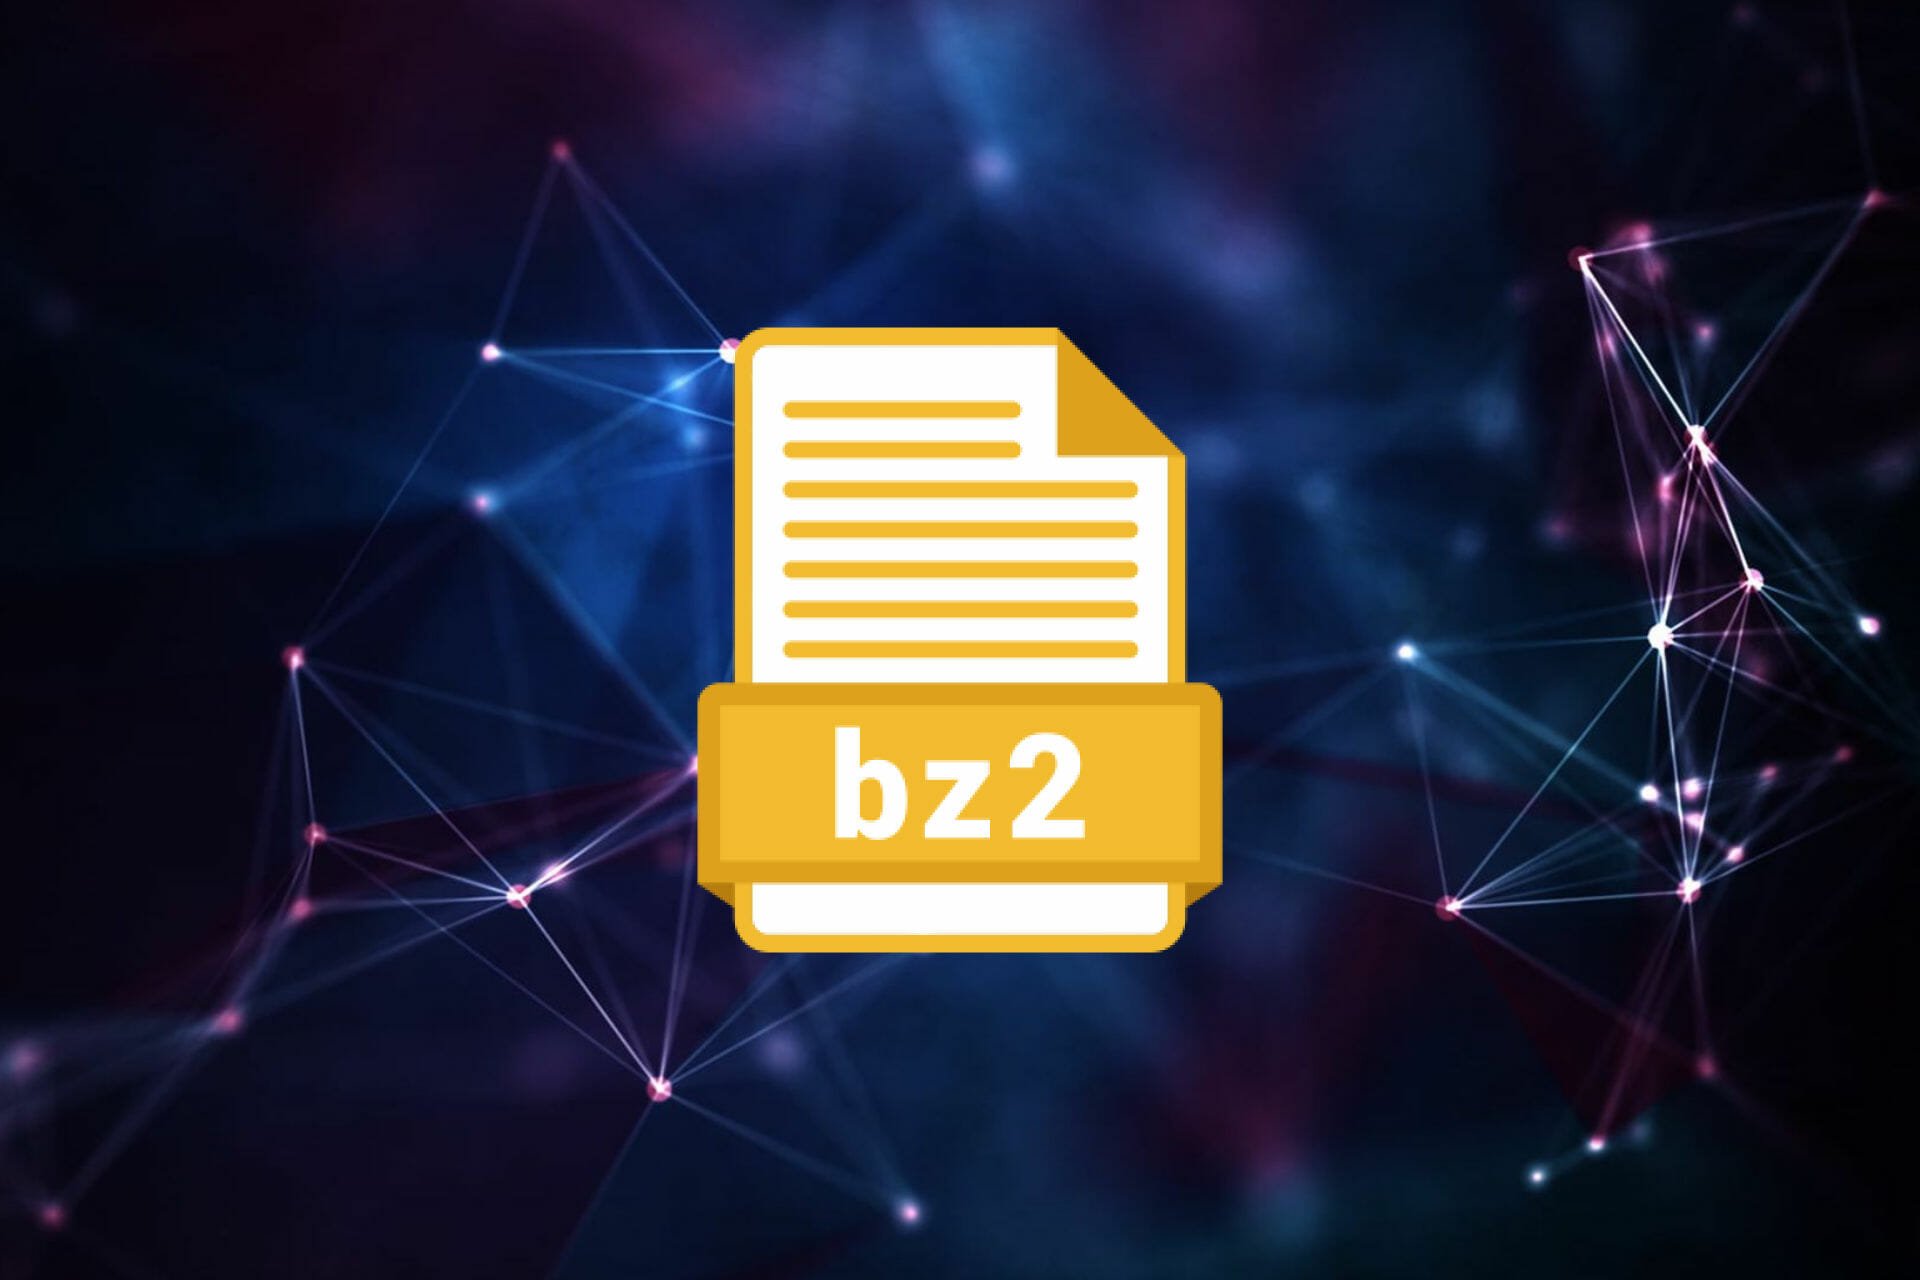 How To Extract Decompress Bz2 File In Windows 10